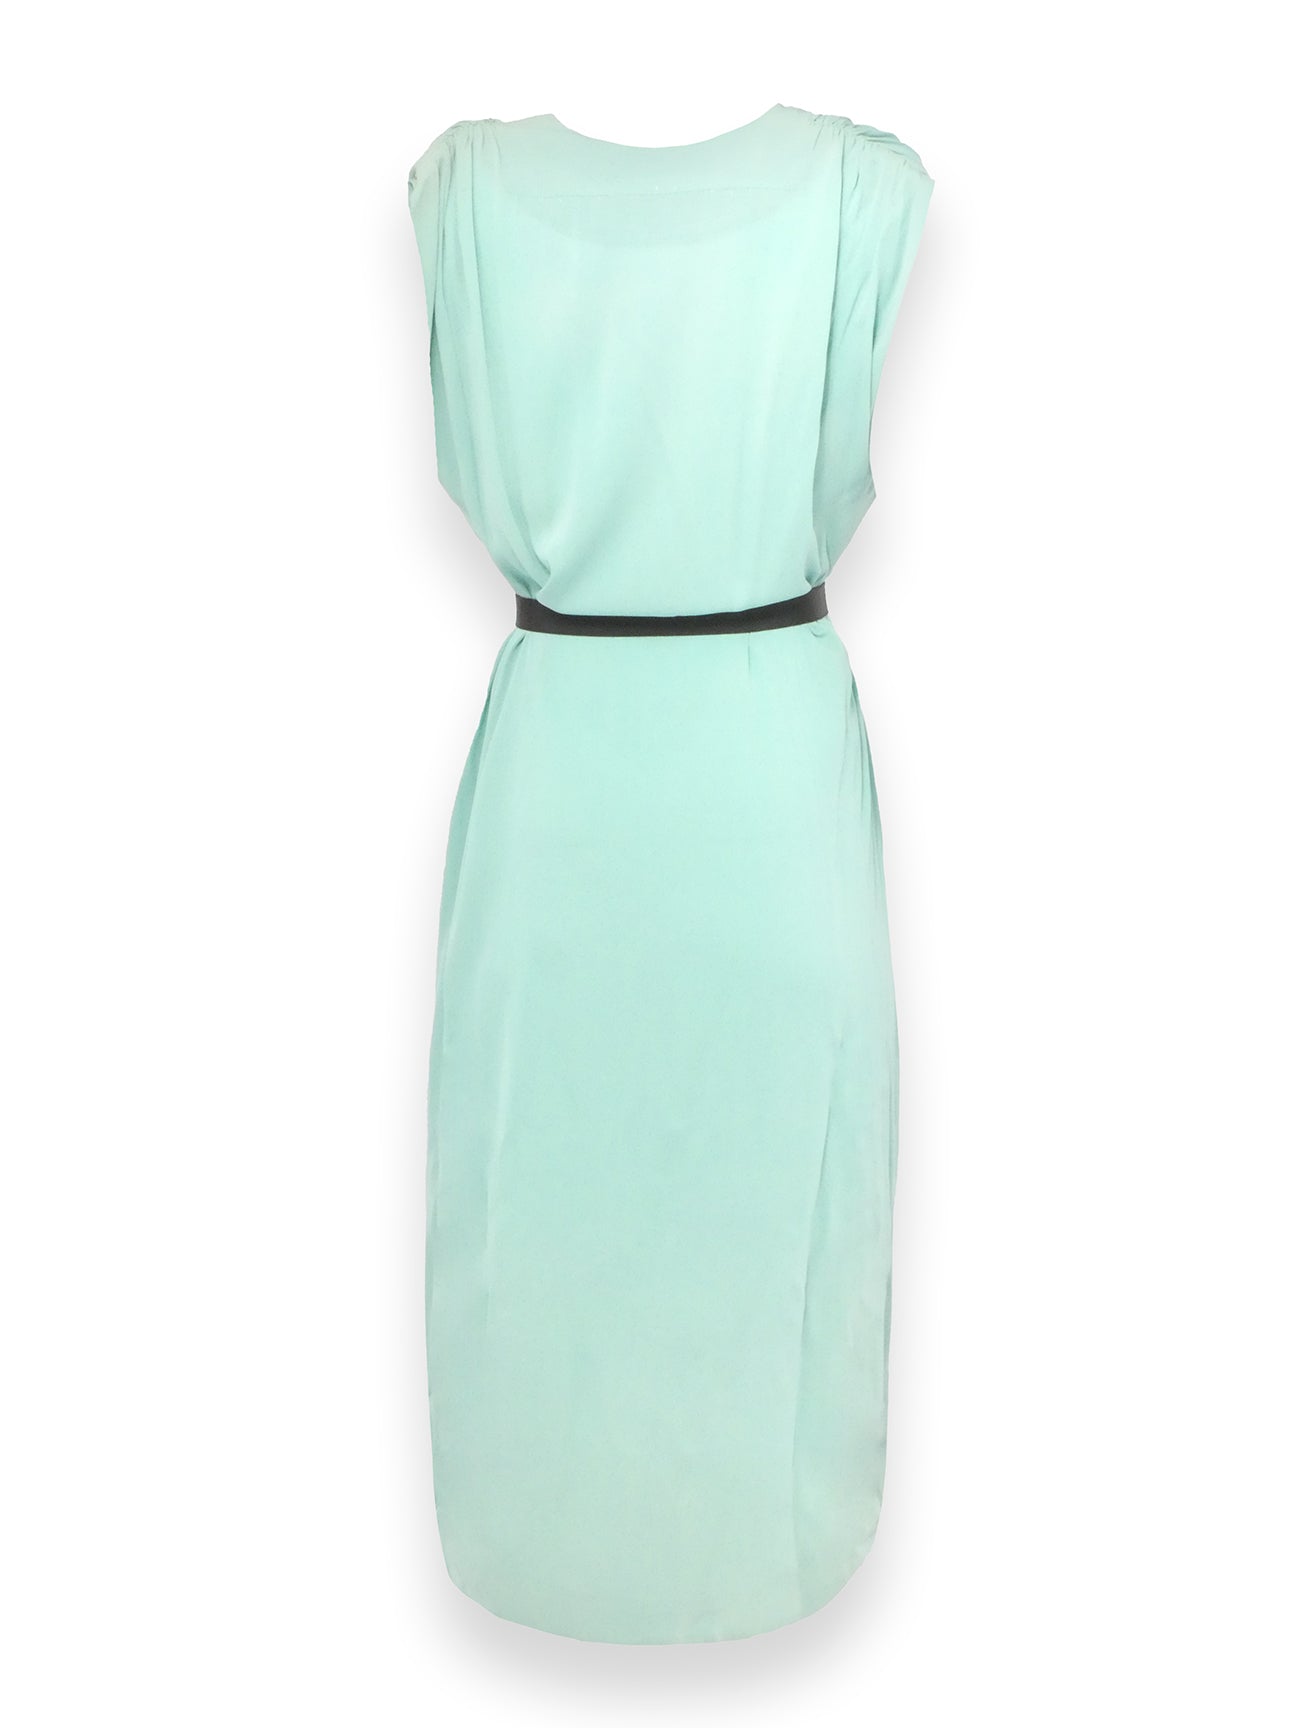 Mint Green Sleevless Dress with Black Button Up Details